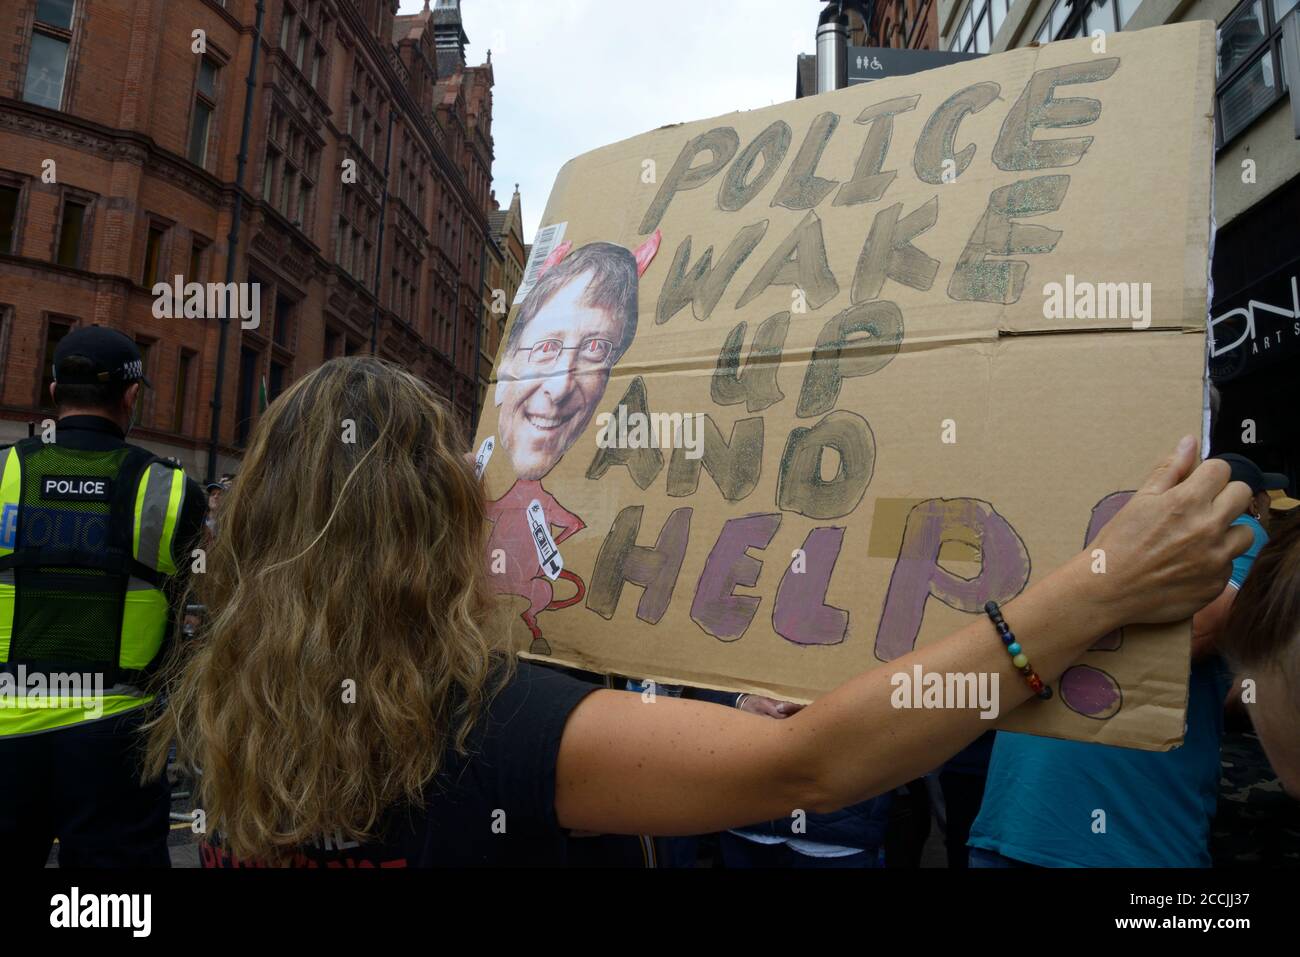 Right wing woman, with poster, showing Bill Gates & Police,wake up & Help. Stock Photo